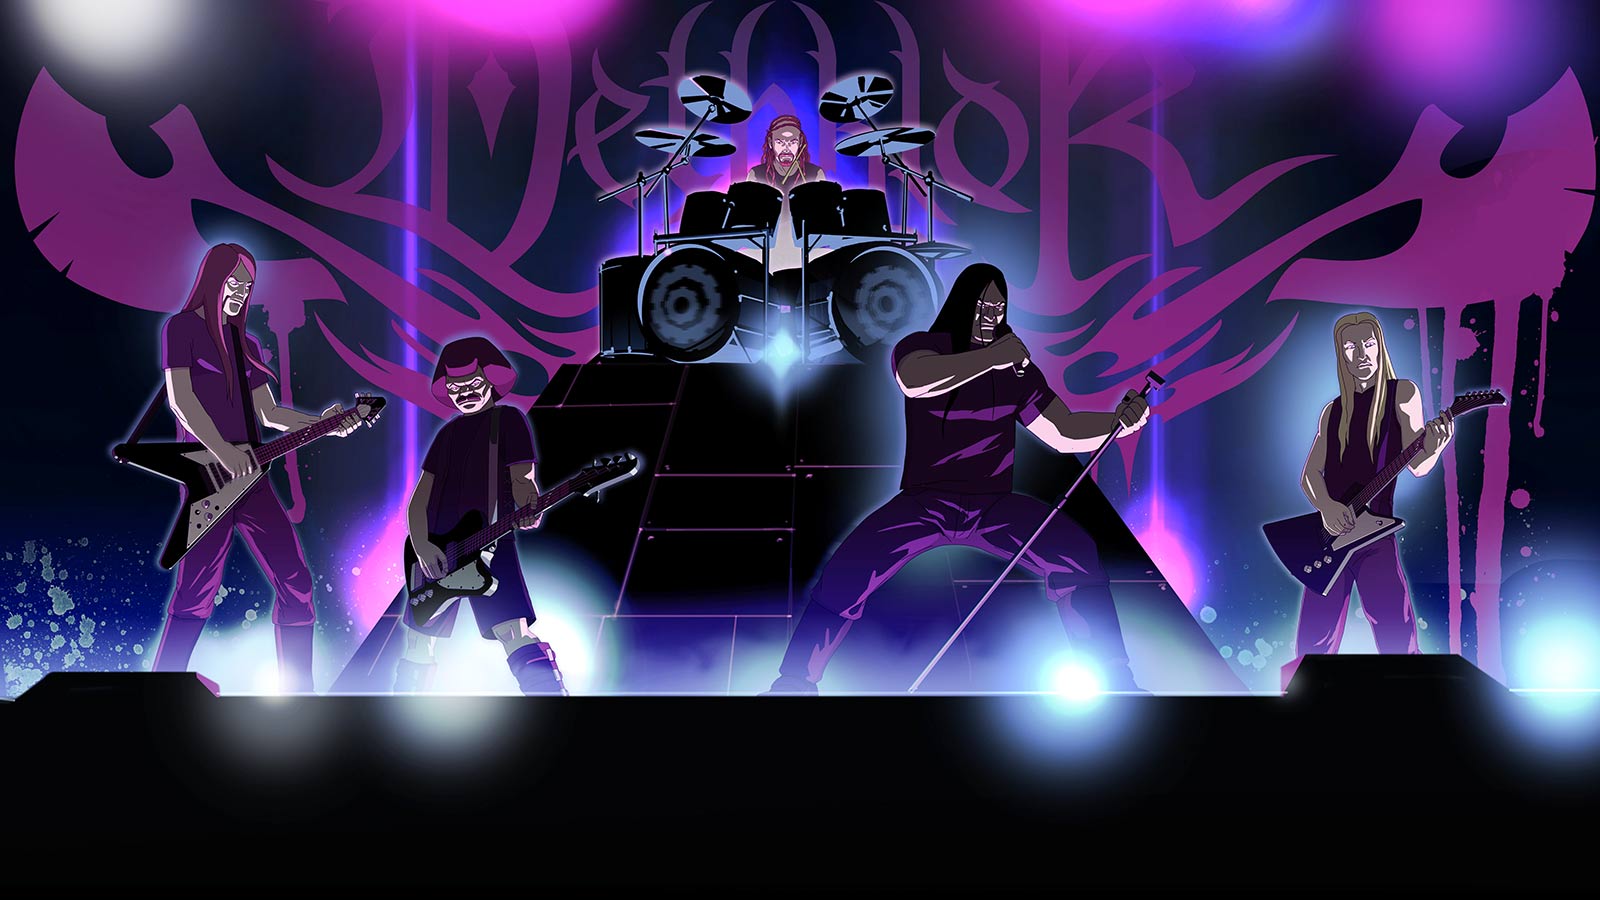 DETHKLOK Hear first new song in 10 years, see trailer for